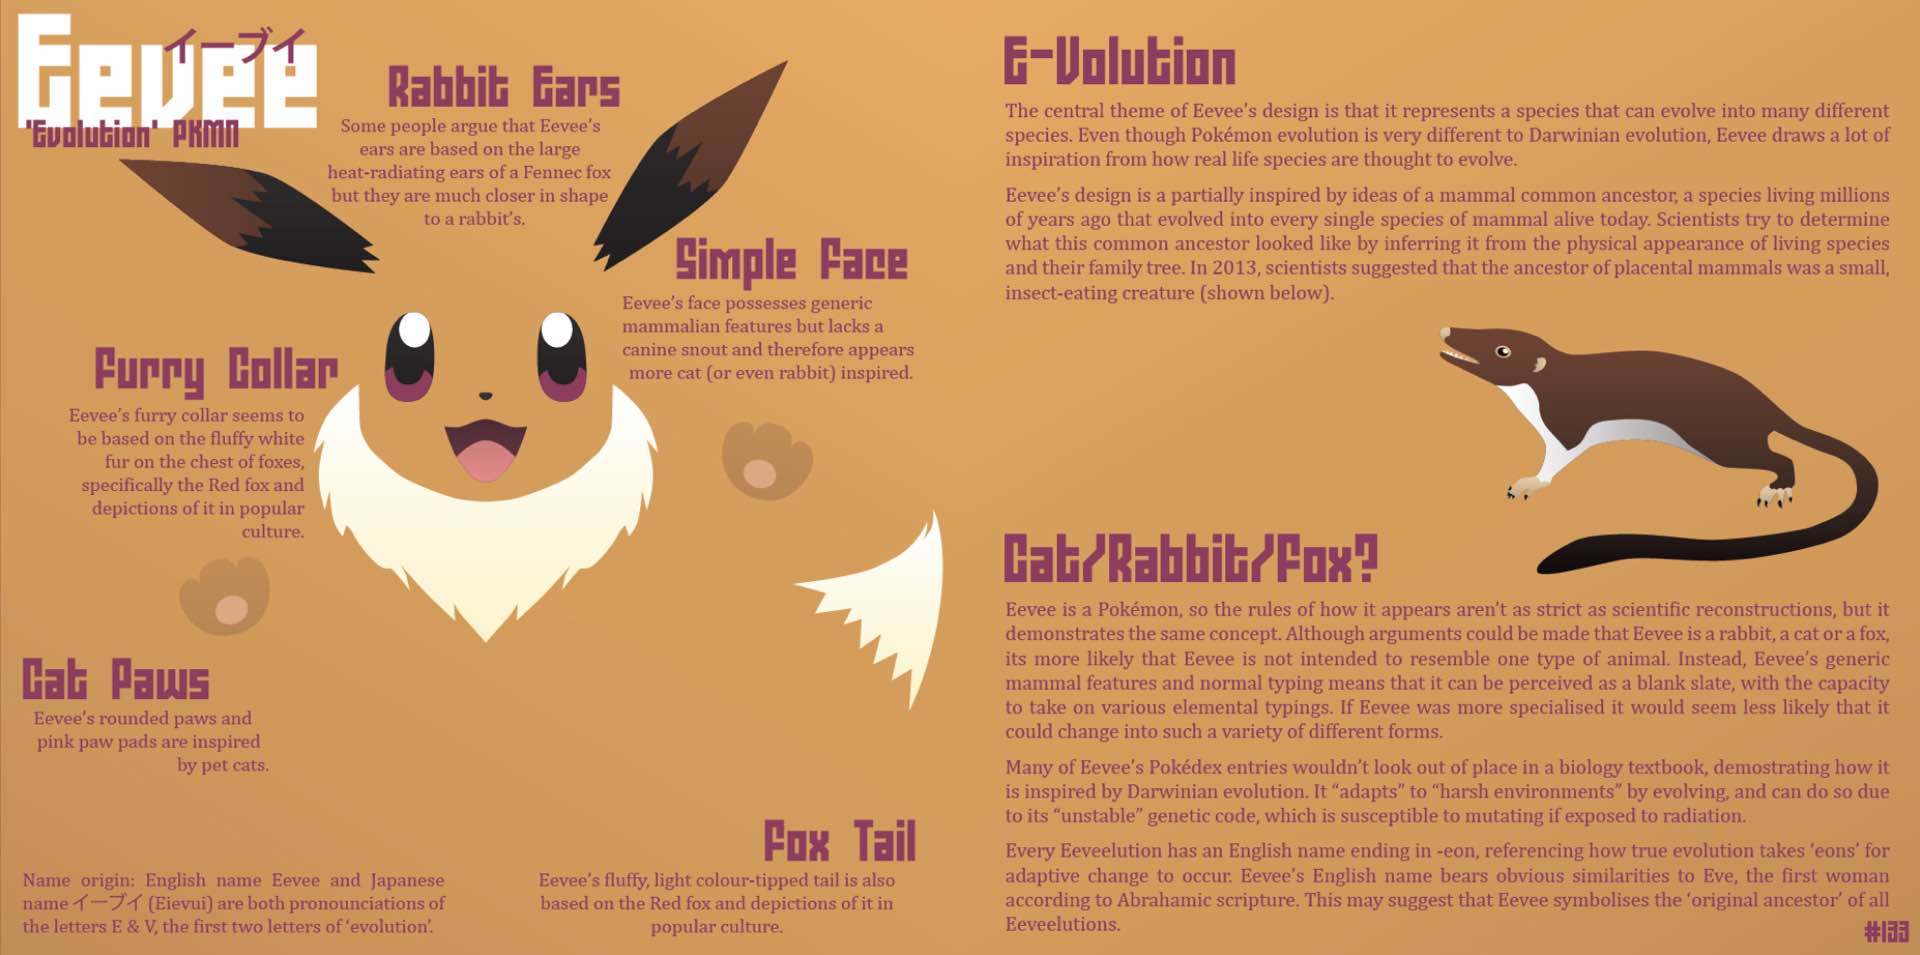 On the Origin: The Unofficial Guide to Pokémon Design' by No